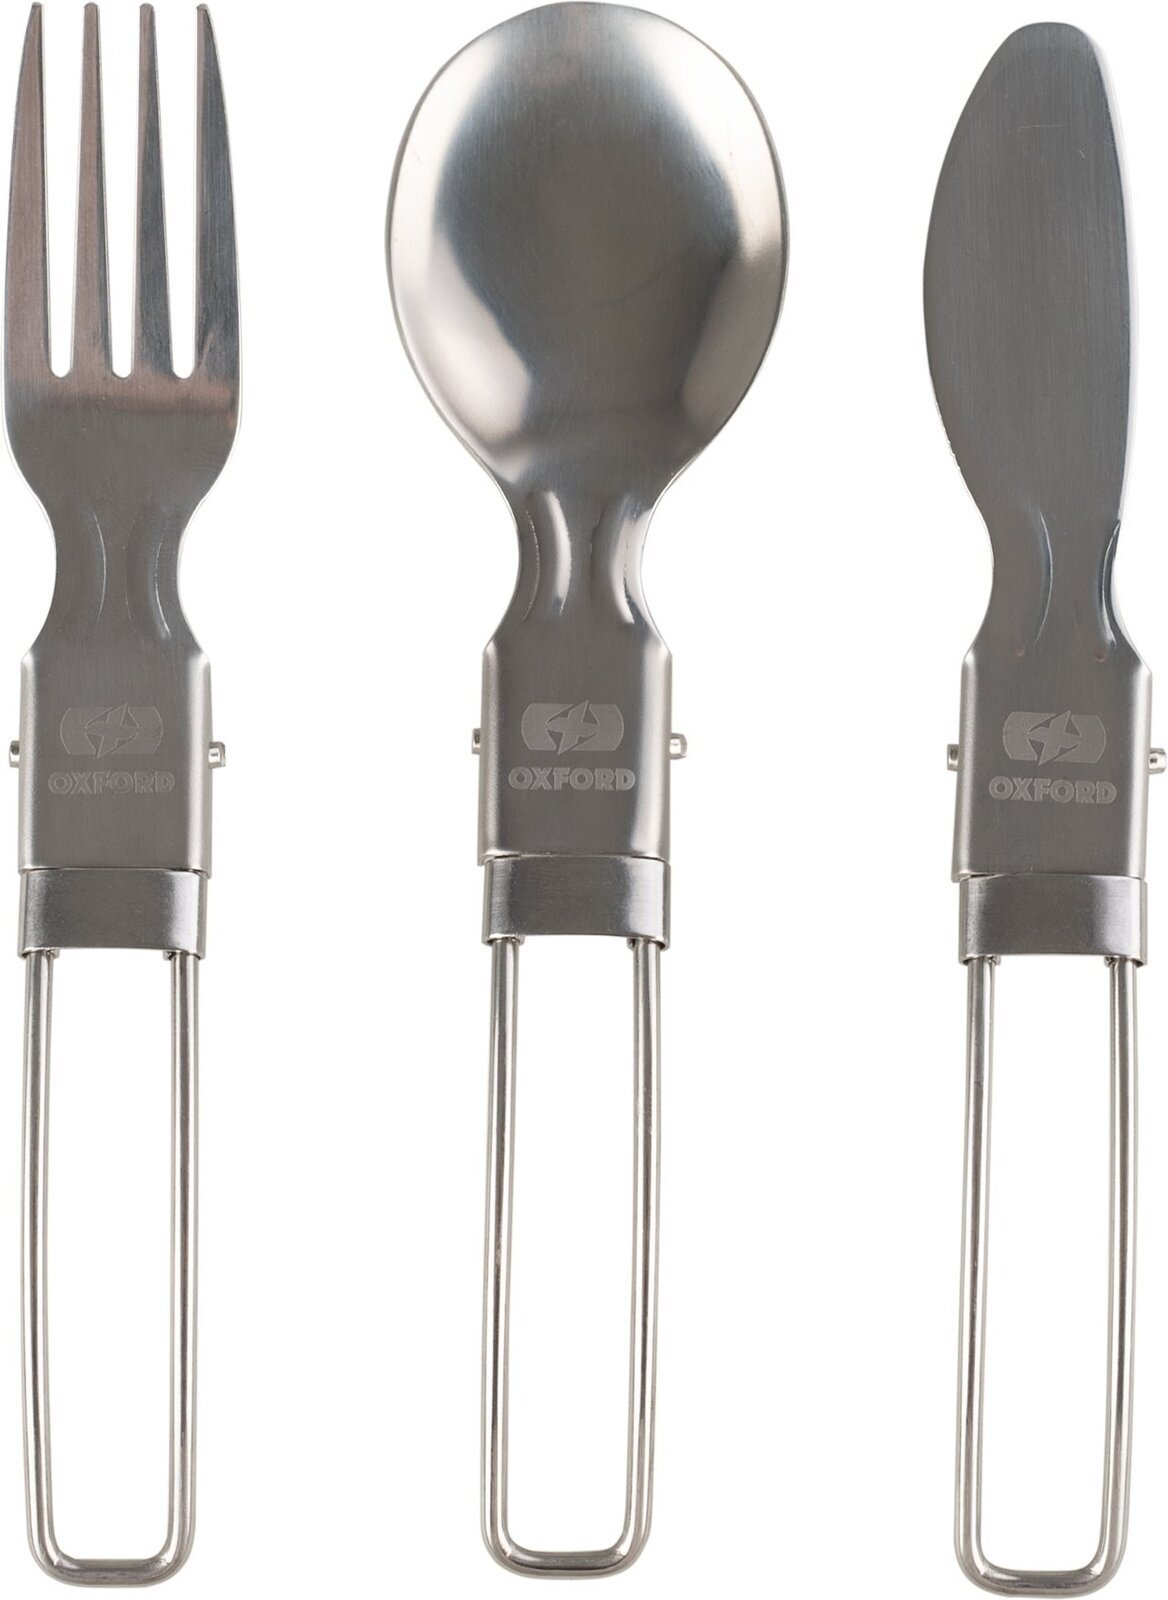 Posate Oxford Camping Cutlery Posate